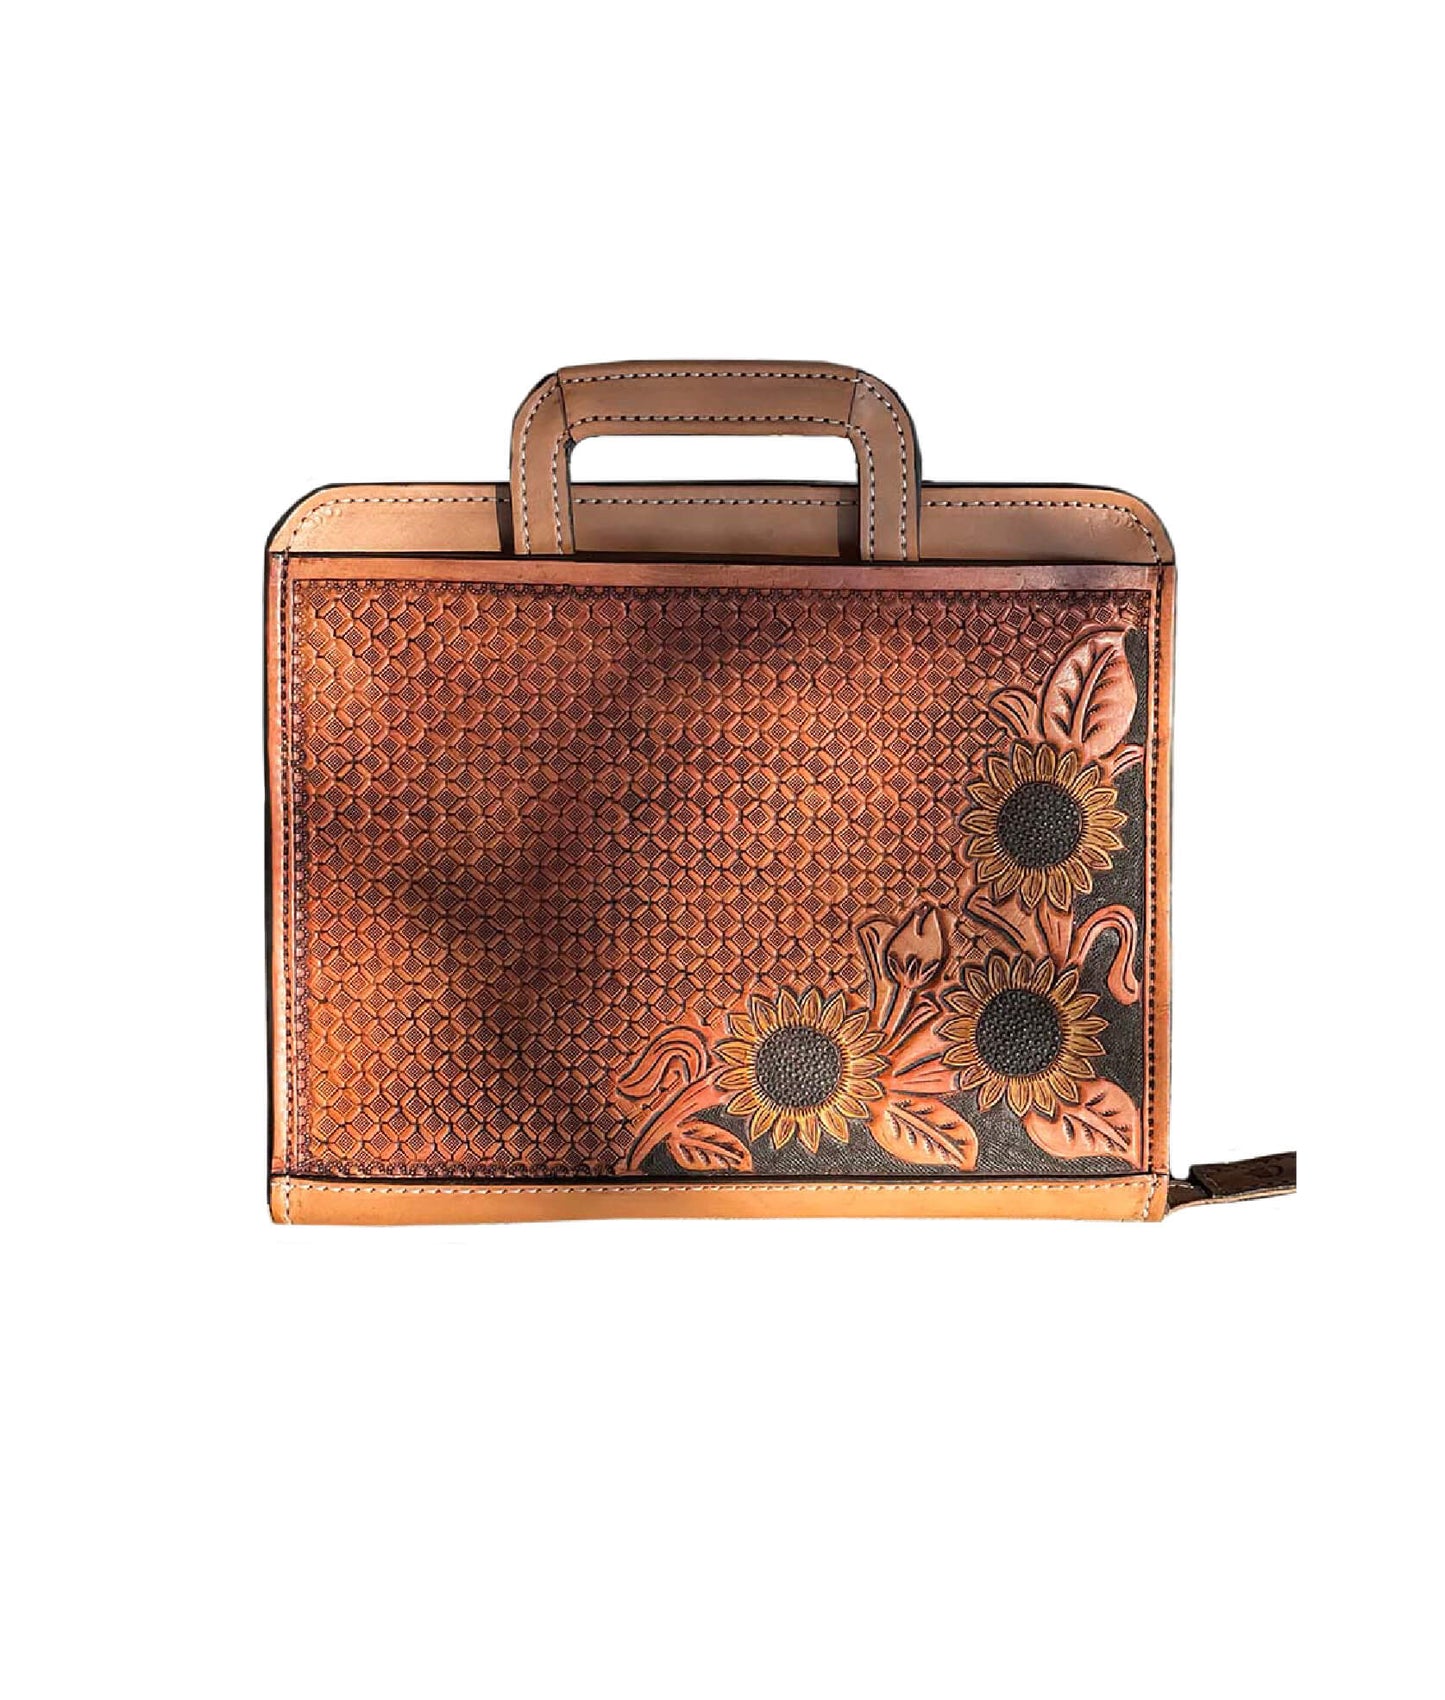 Cowboy Briefcase golden leather waffle and sunflower tooling with background paint